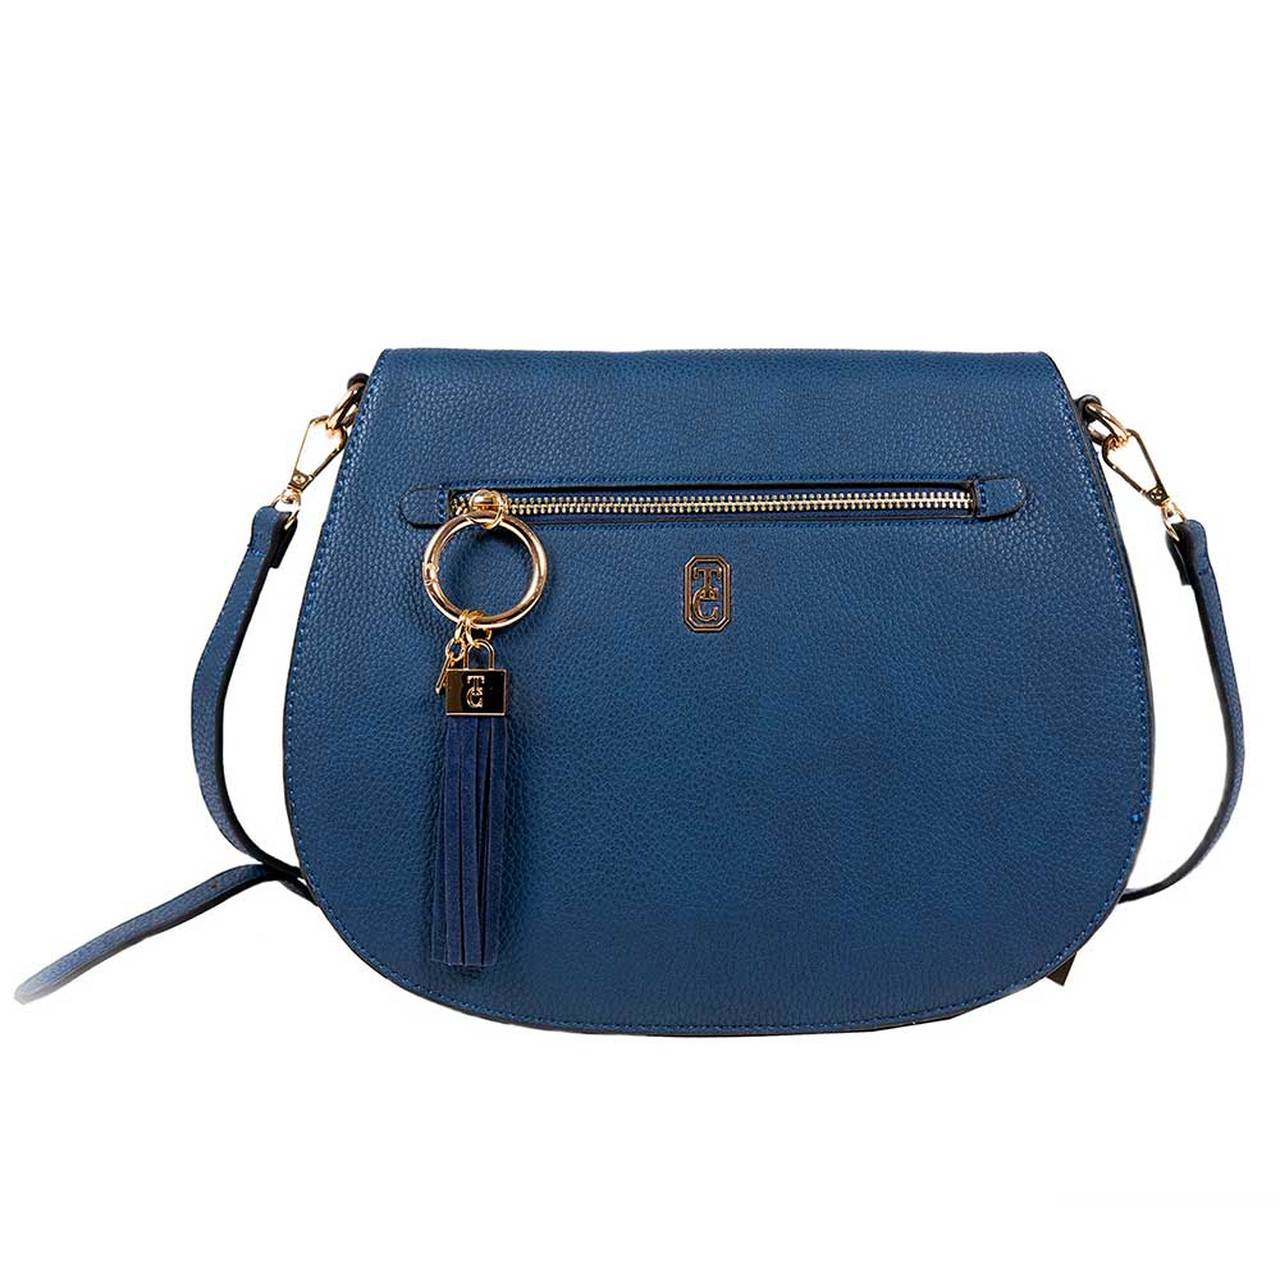 Tipperary Crystal Savoy Large Satchel Bag Navy  This stylish new addition to our bag collection is proving to be very popular, with an outside zip compartment the Savoy bag is stylish and functional. 